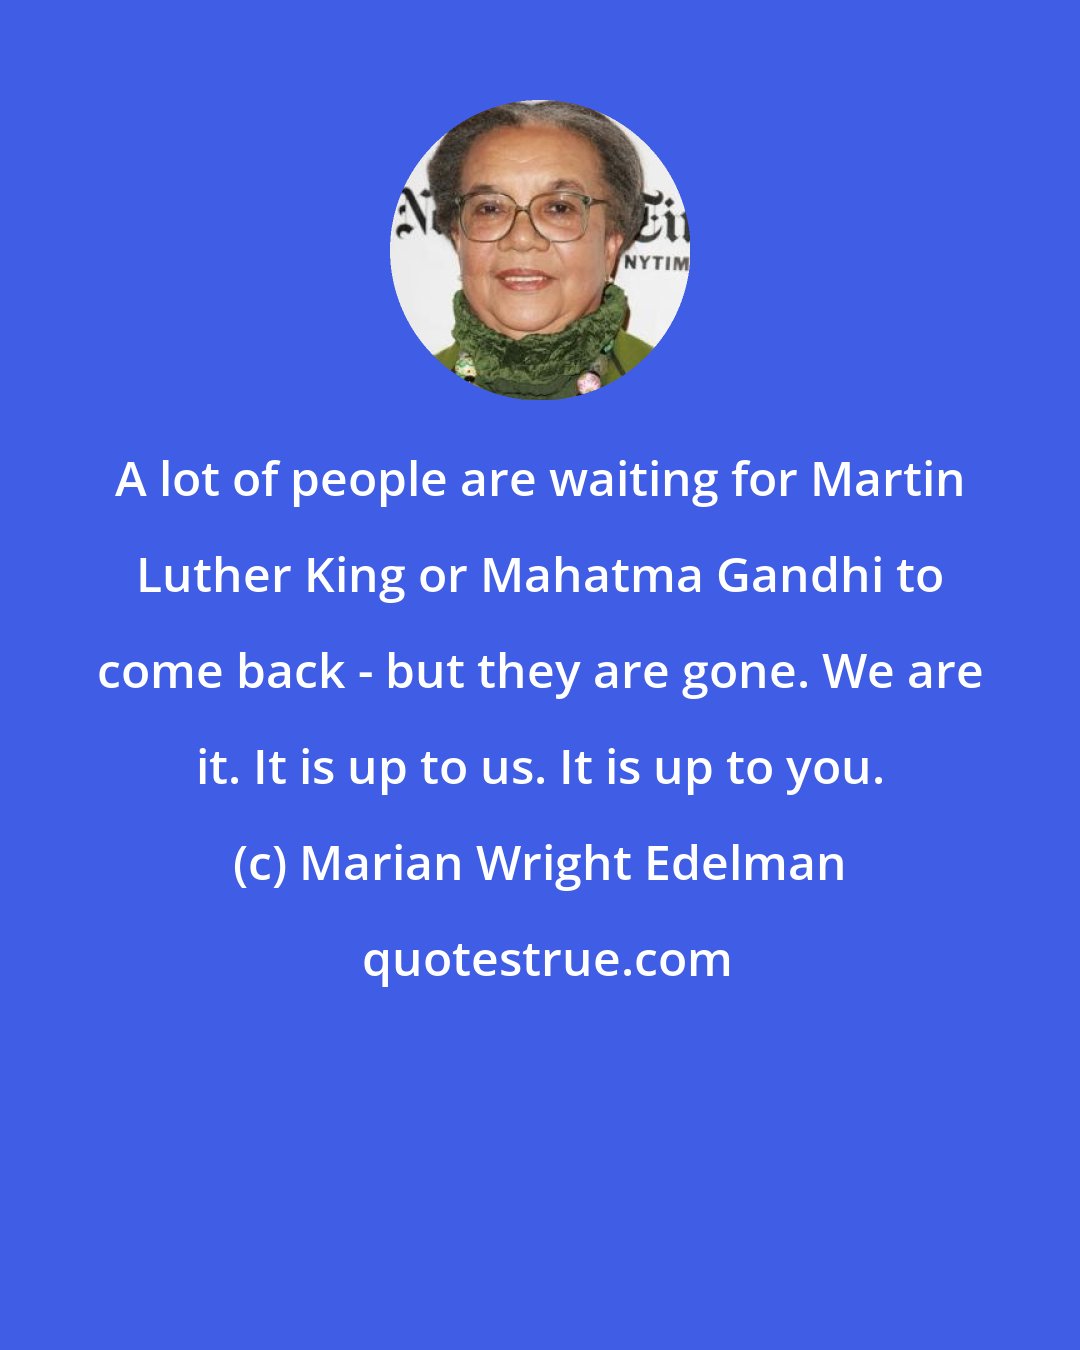 Marian Wright Edelman: A lot of people are waiting for Martin Luther King or Mahatma Gandhi to come back - but they are gone. We are it. It is up to us. It is up to you.